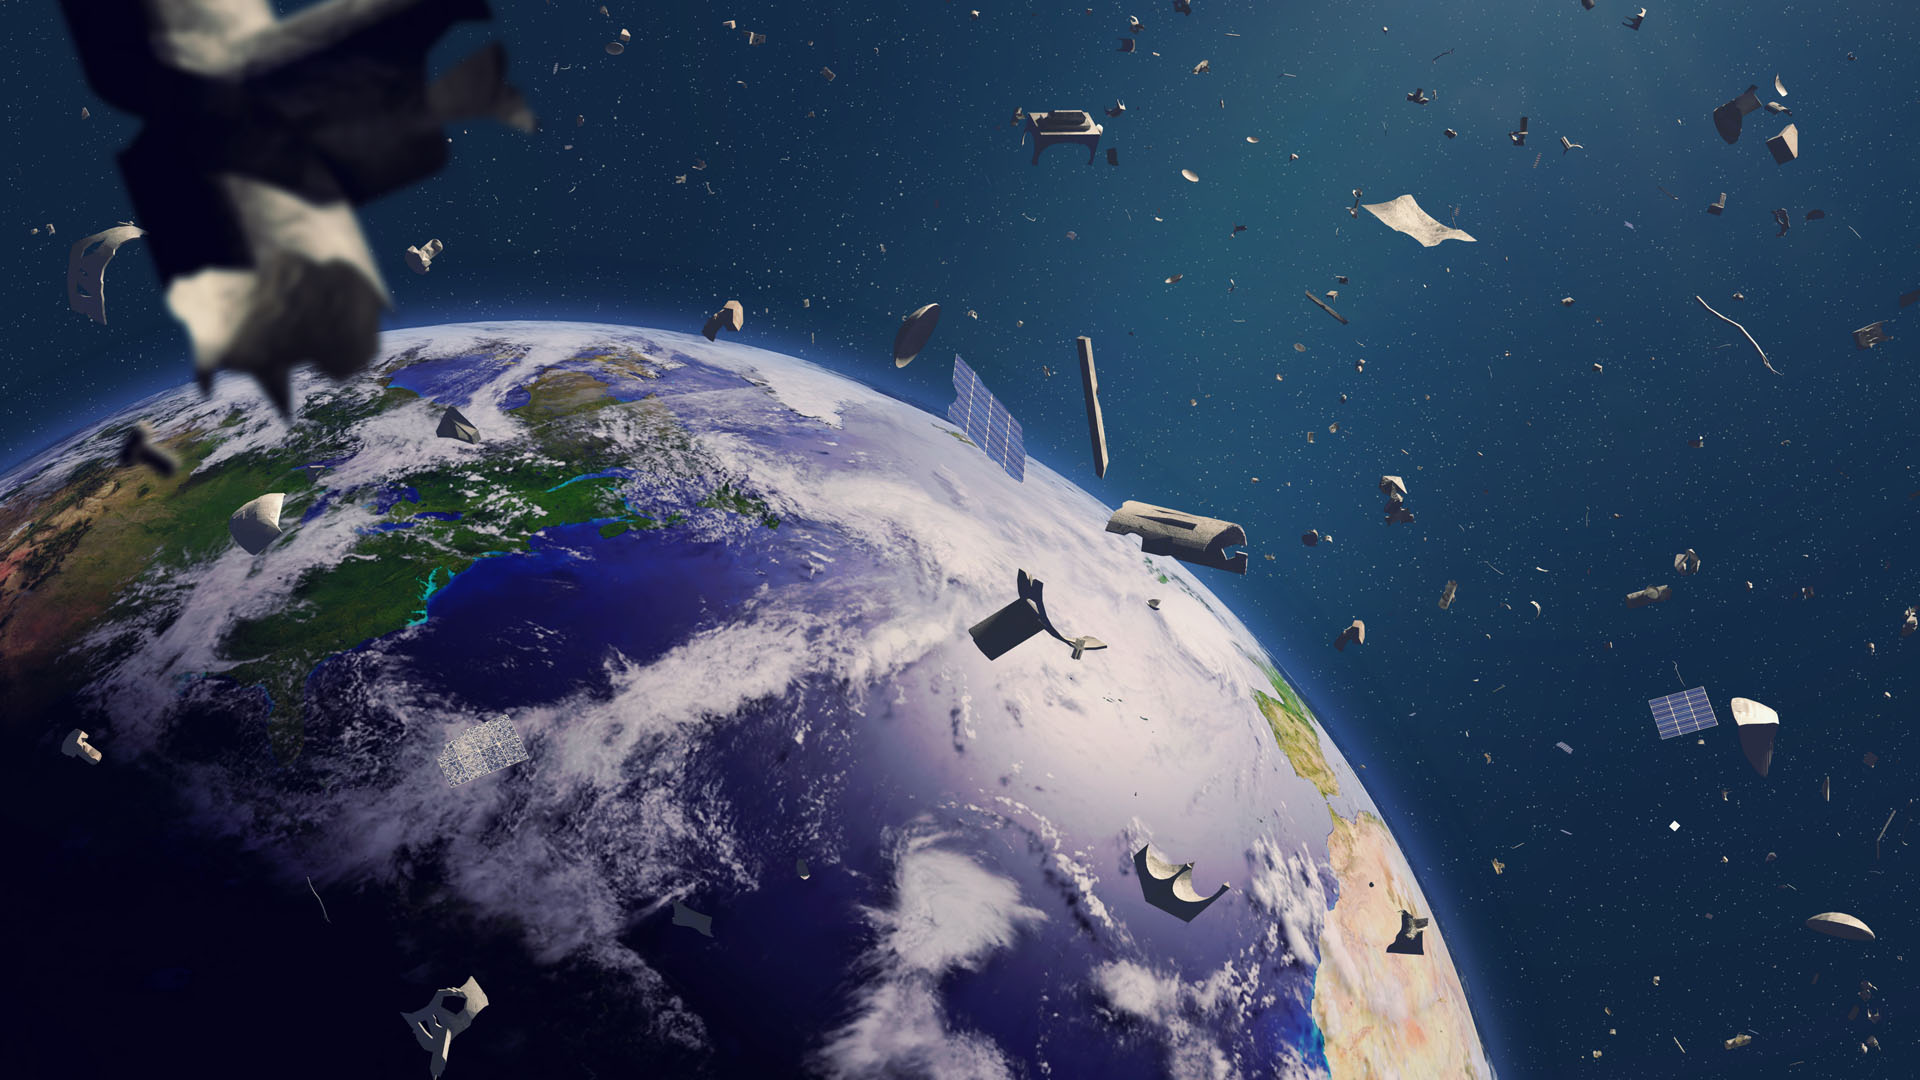 Expert warns of space debris risk as China disregards rules – when should we worry?